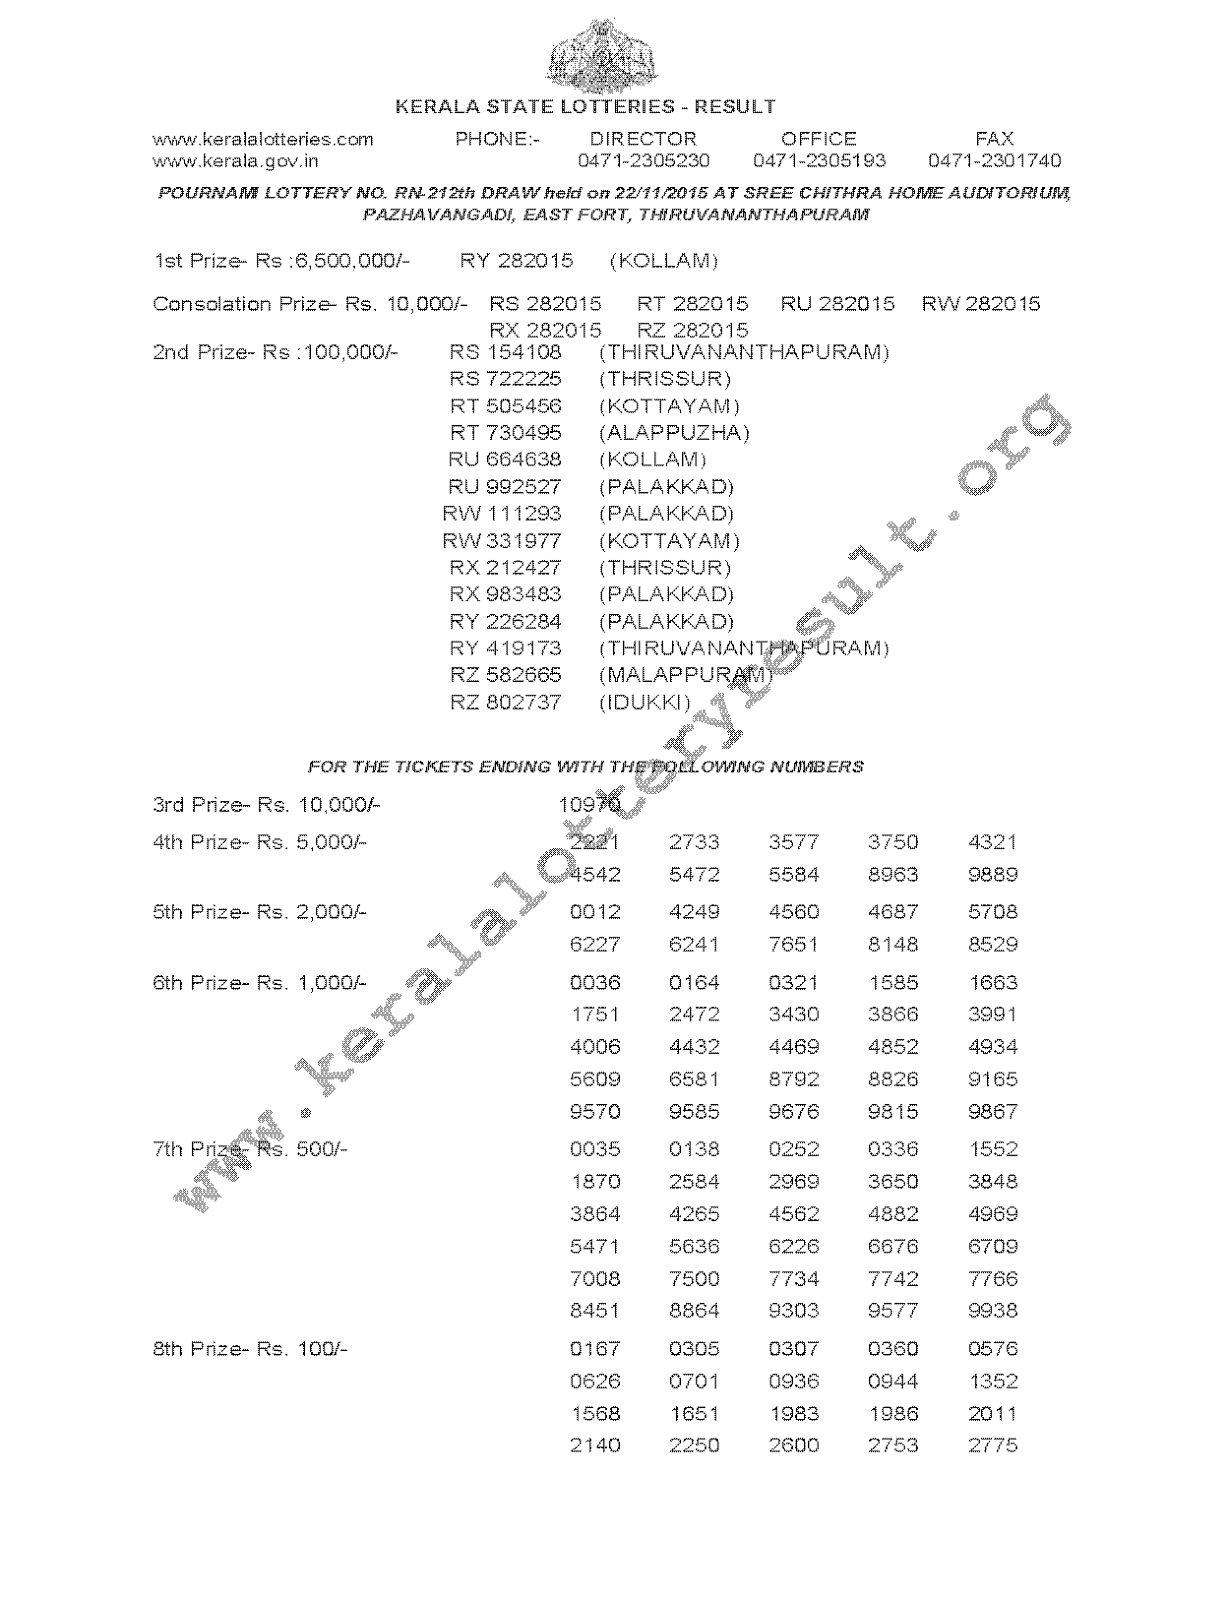 Pournami Lottery RN 212 Result 22-11-2015